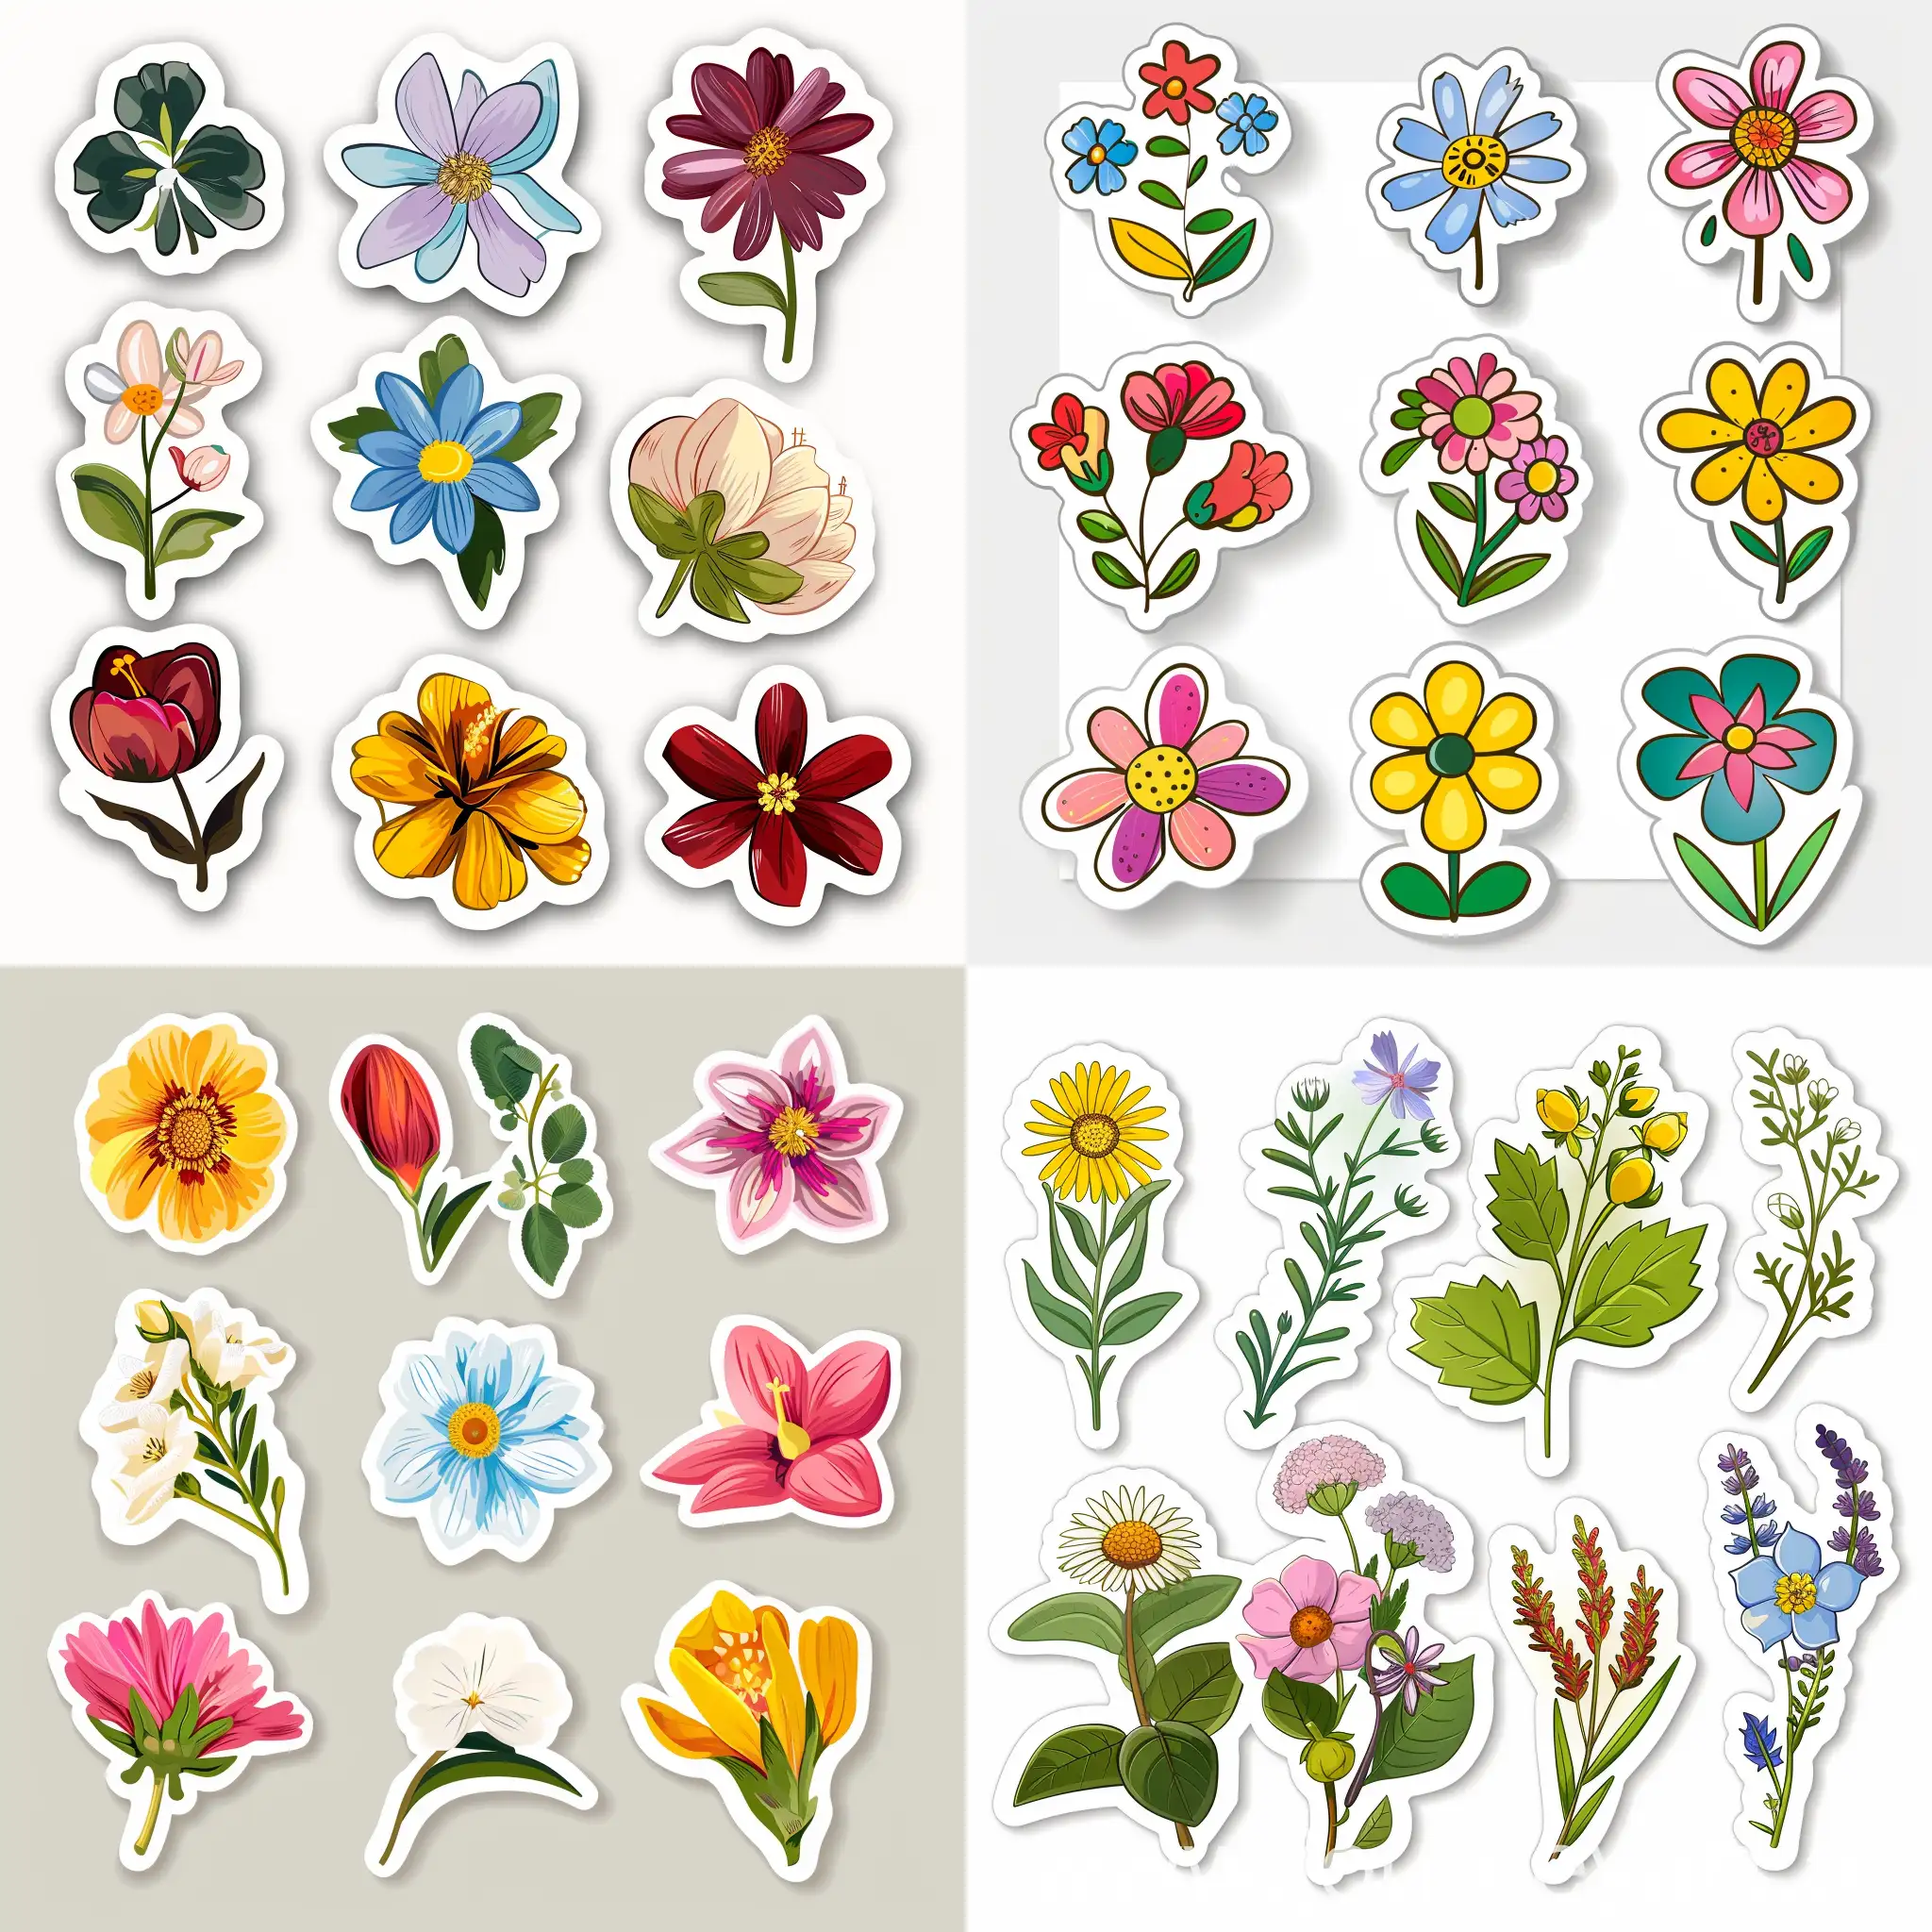 Colorful-Single-Flower-Sticker-Set-Vibrant-Clipart-Collection-in-Flat-Style